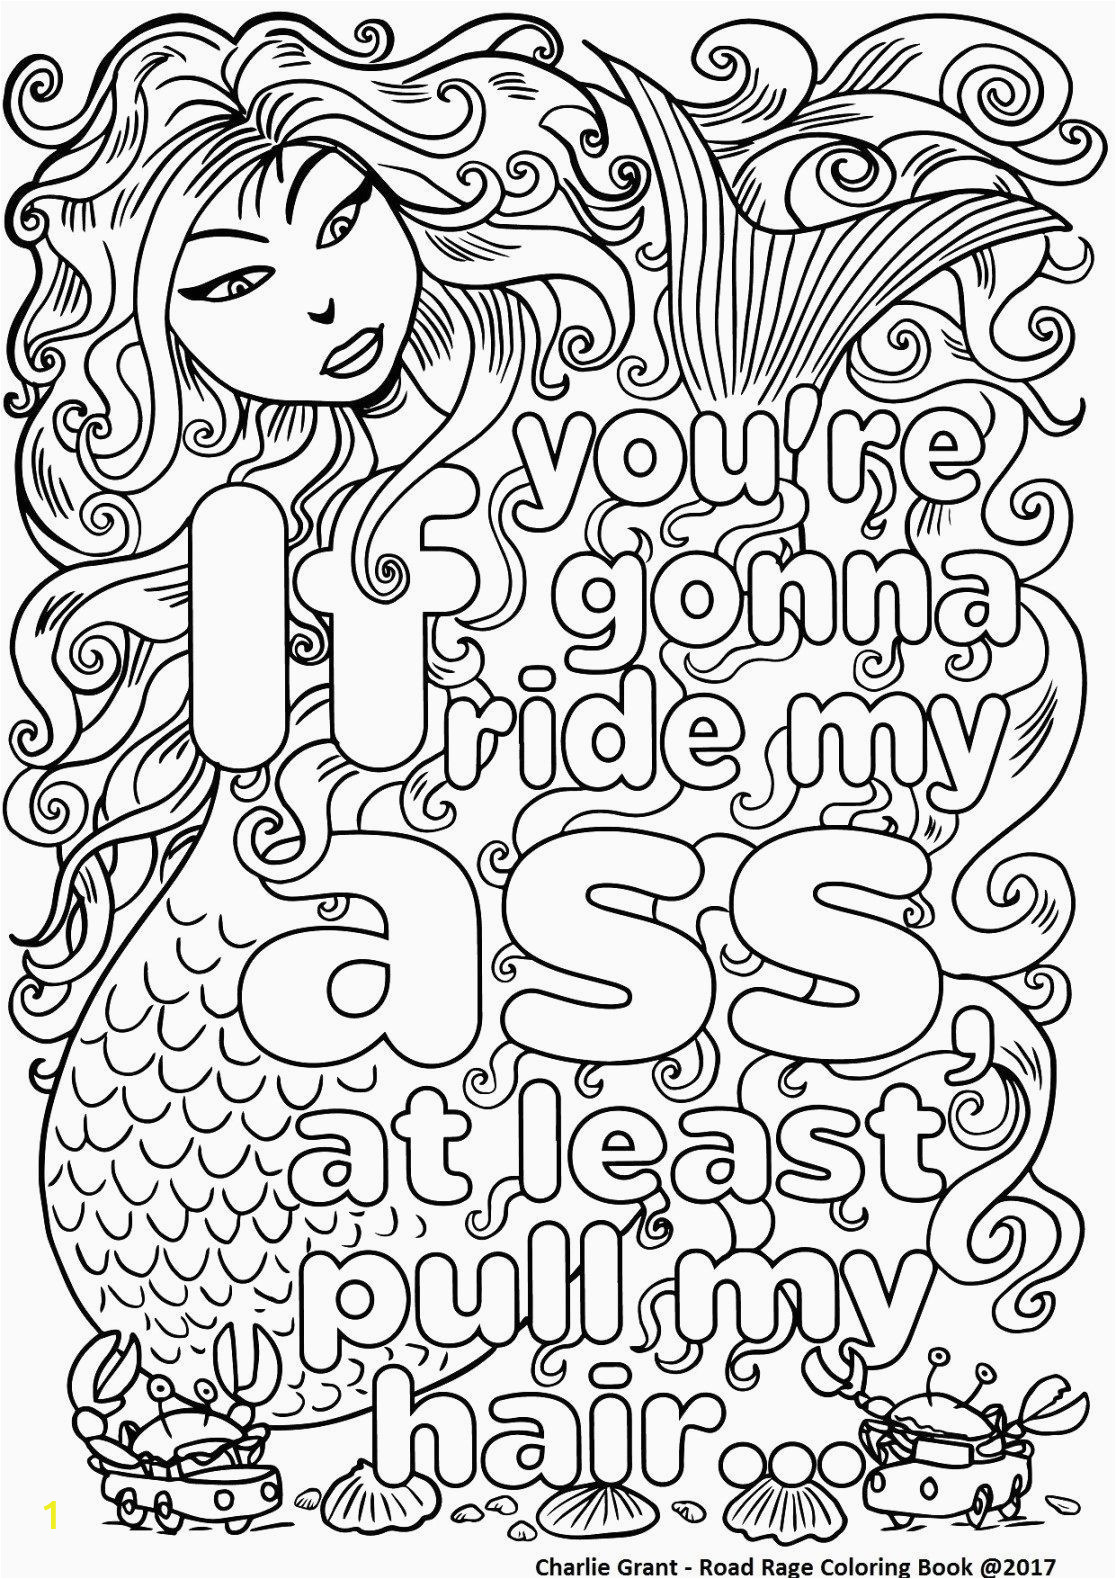 Free Printable Adult Swear Word Coloring Pages Coloring Book Art Public Domain